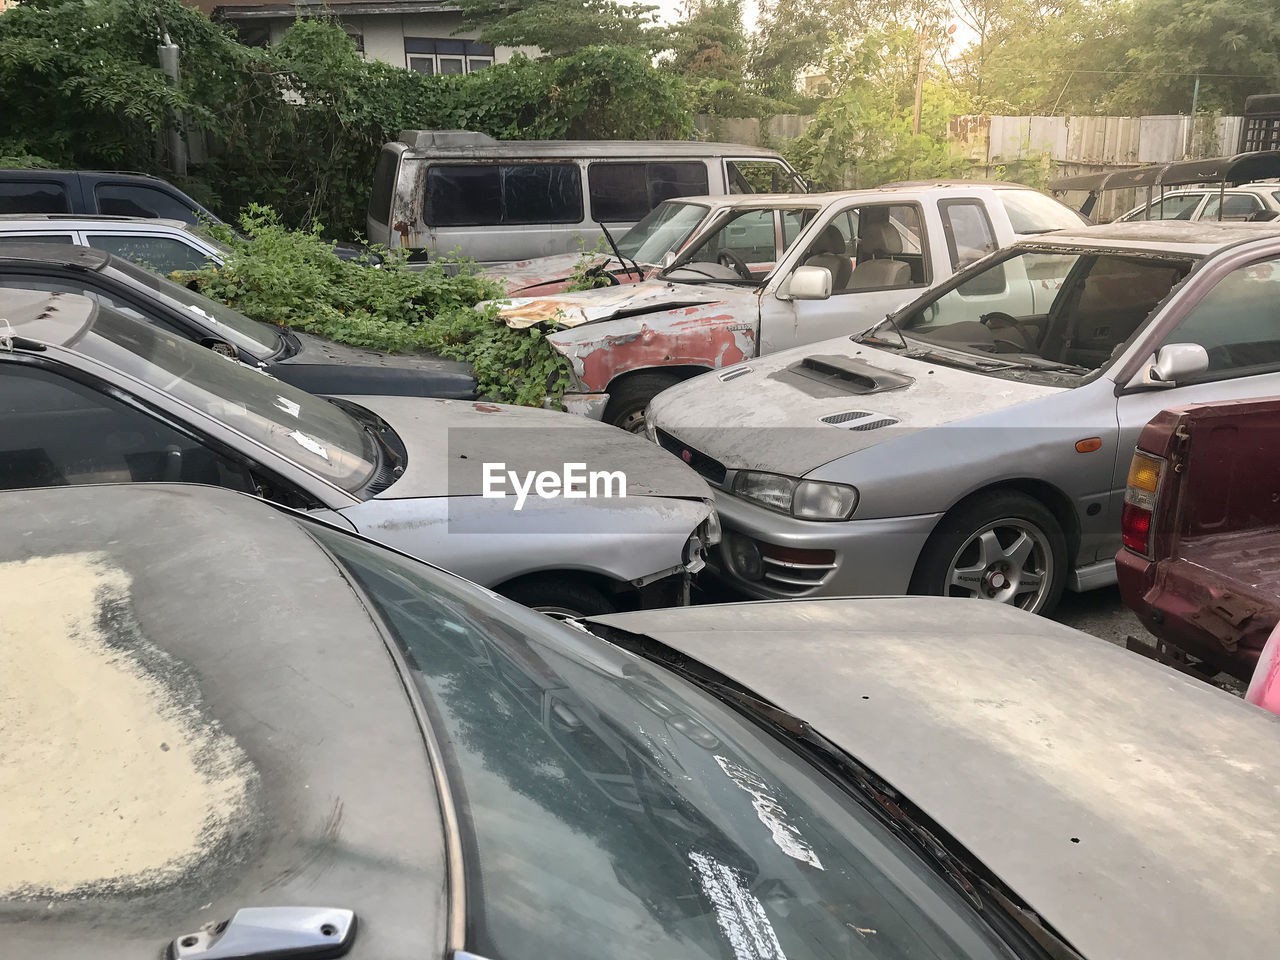 CARS IN PARKING LOT BY ROAD